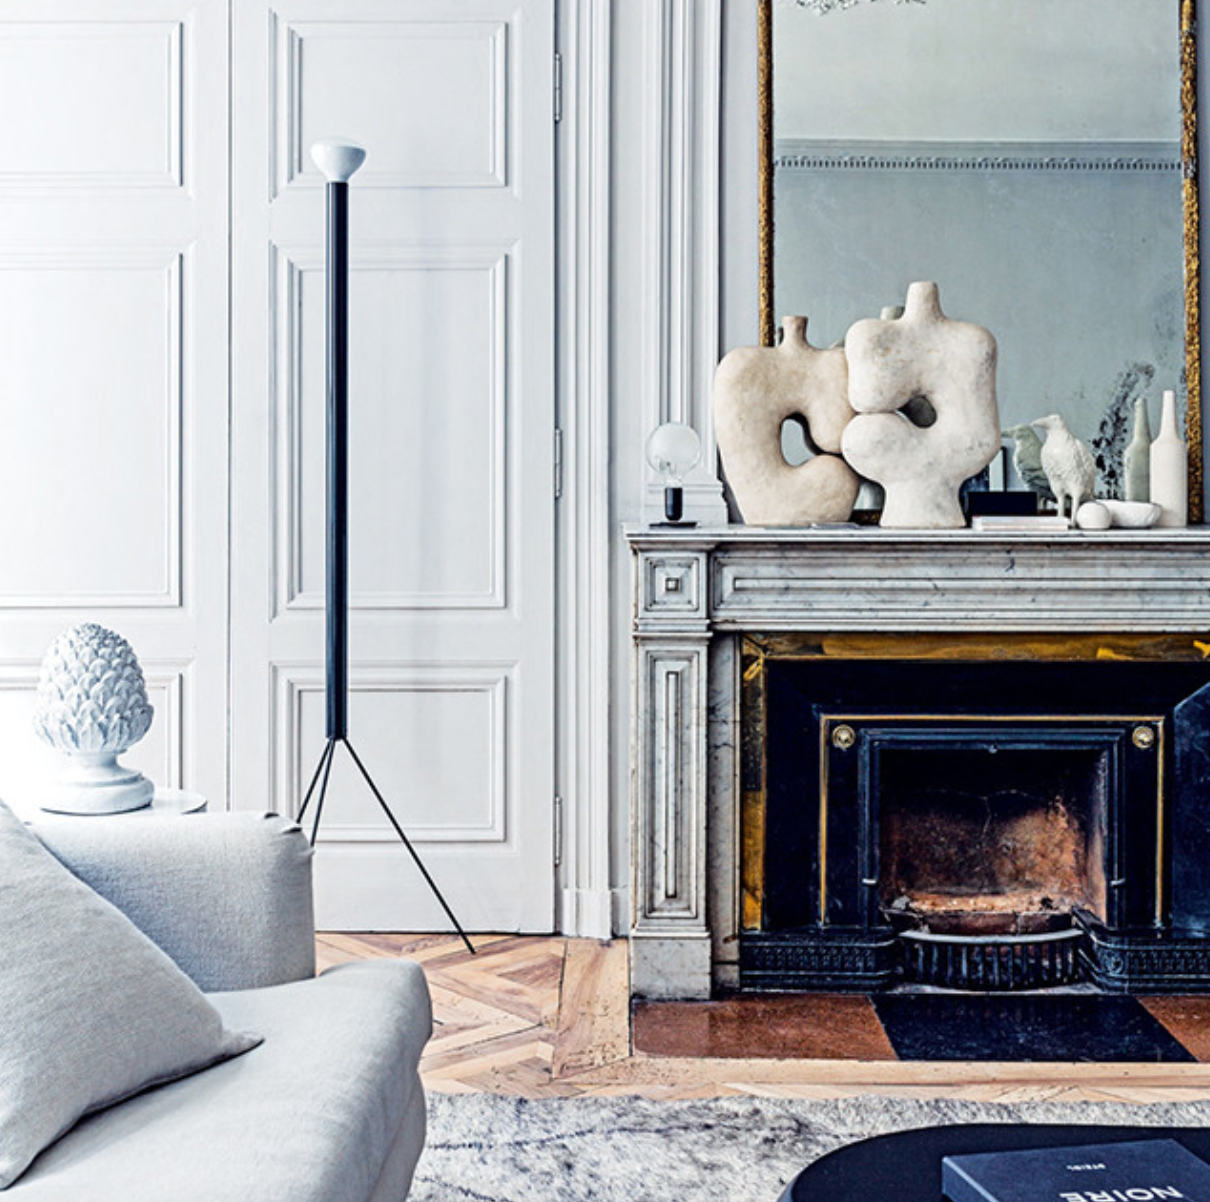 More modern meets Parisian chic: texture, sculpture, a gold mirror and a period fireplace all work so beautifully together.  From <a href="http://www.designattractor.com/2016/03/magnificent-french-apartment.html" target="_blank">Design Attractor</a>.